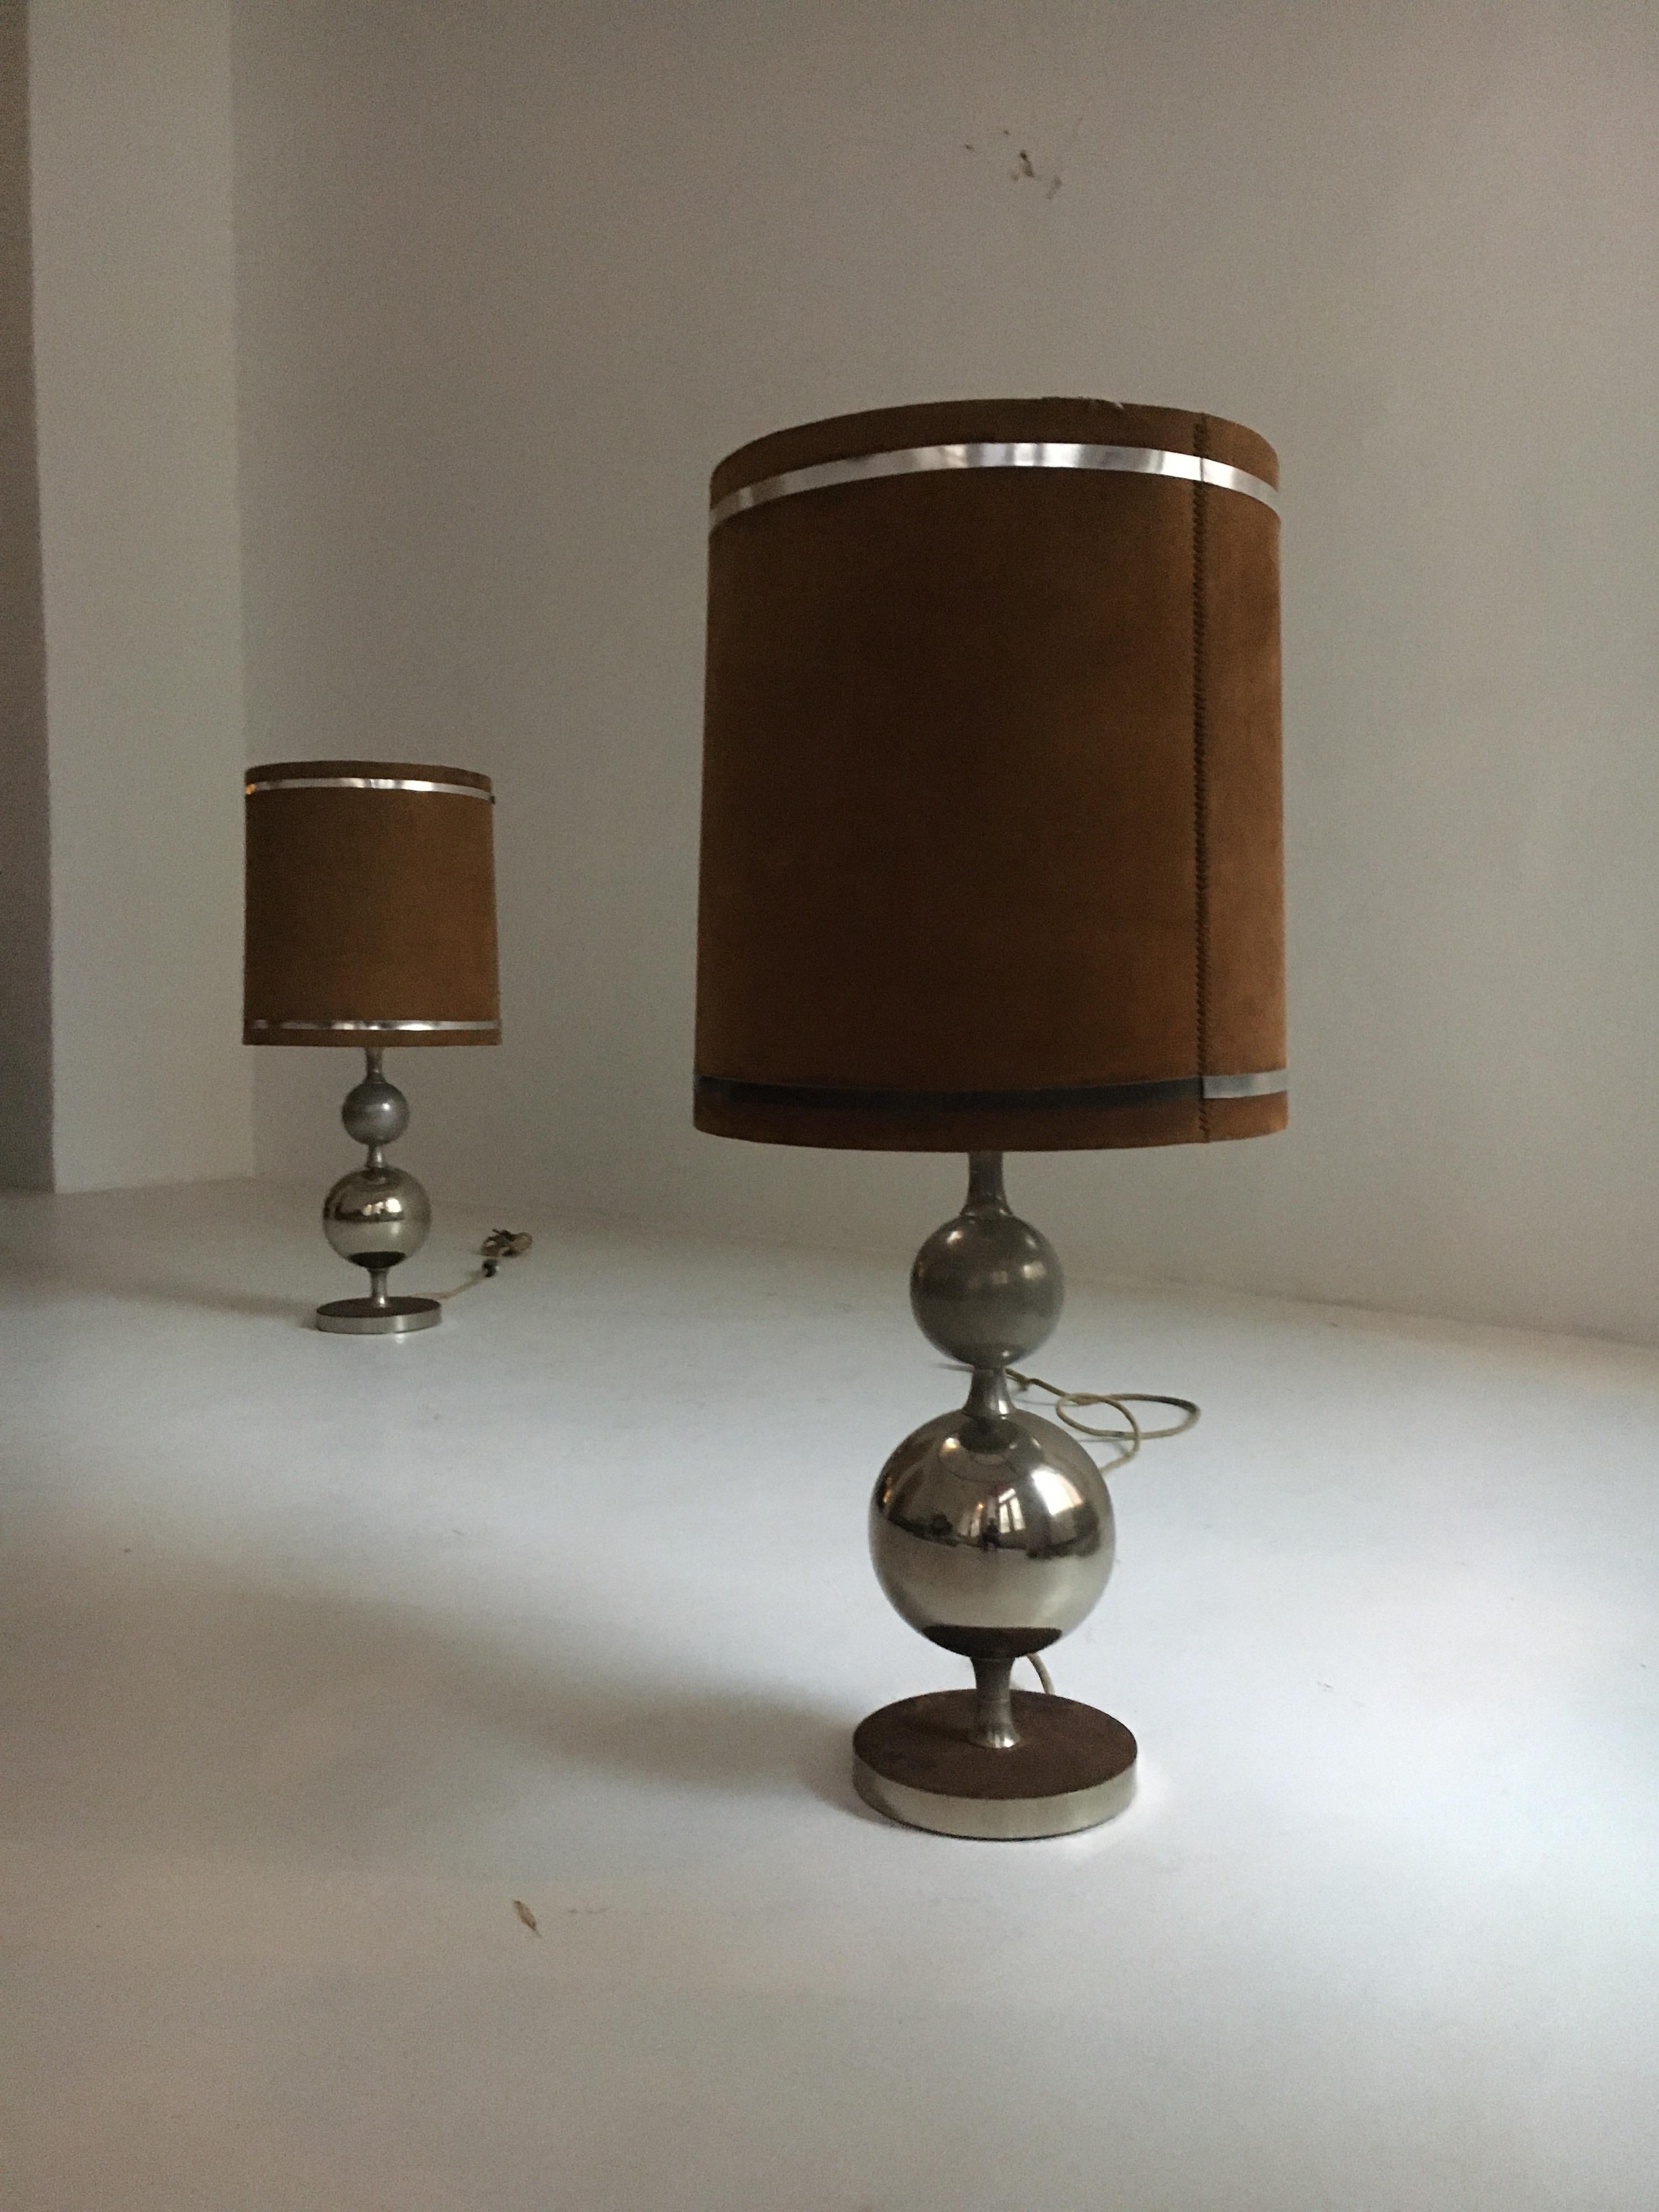 Pierre Cardin Oversized Chrome and Suede Table Lamps, France, 1970s For Sale 2